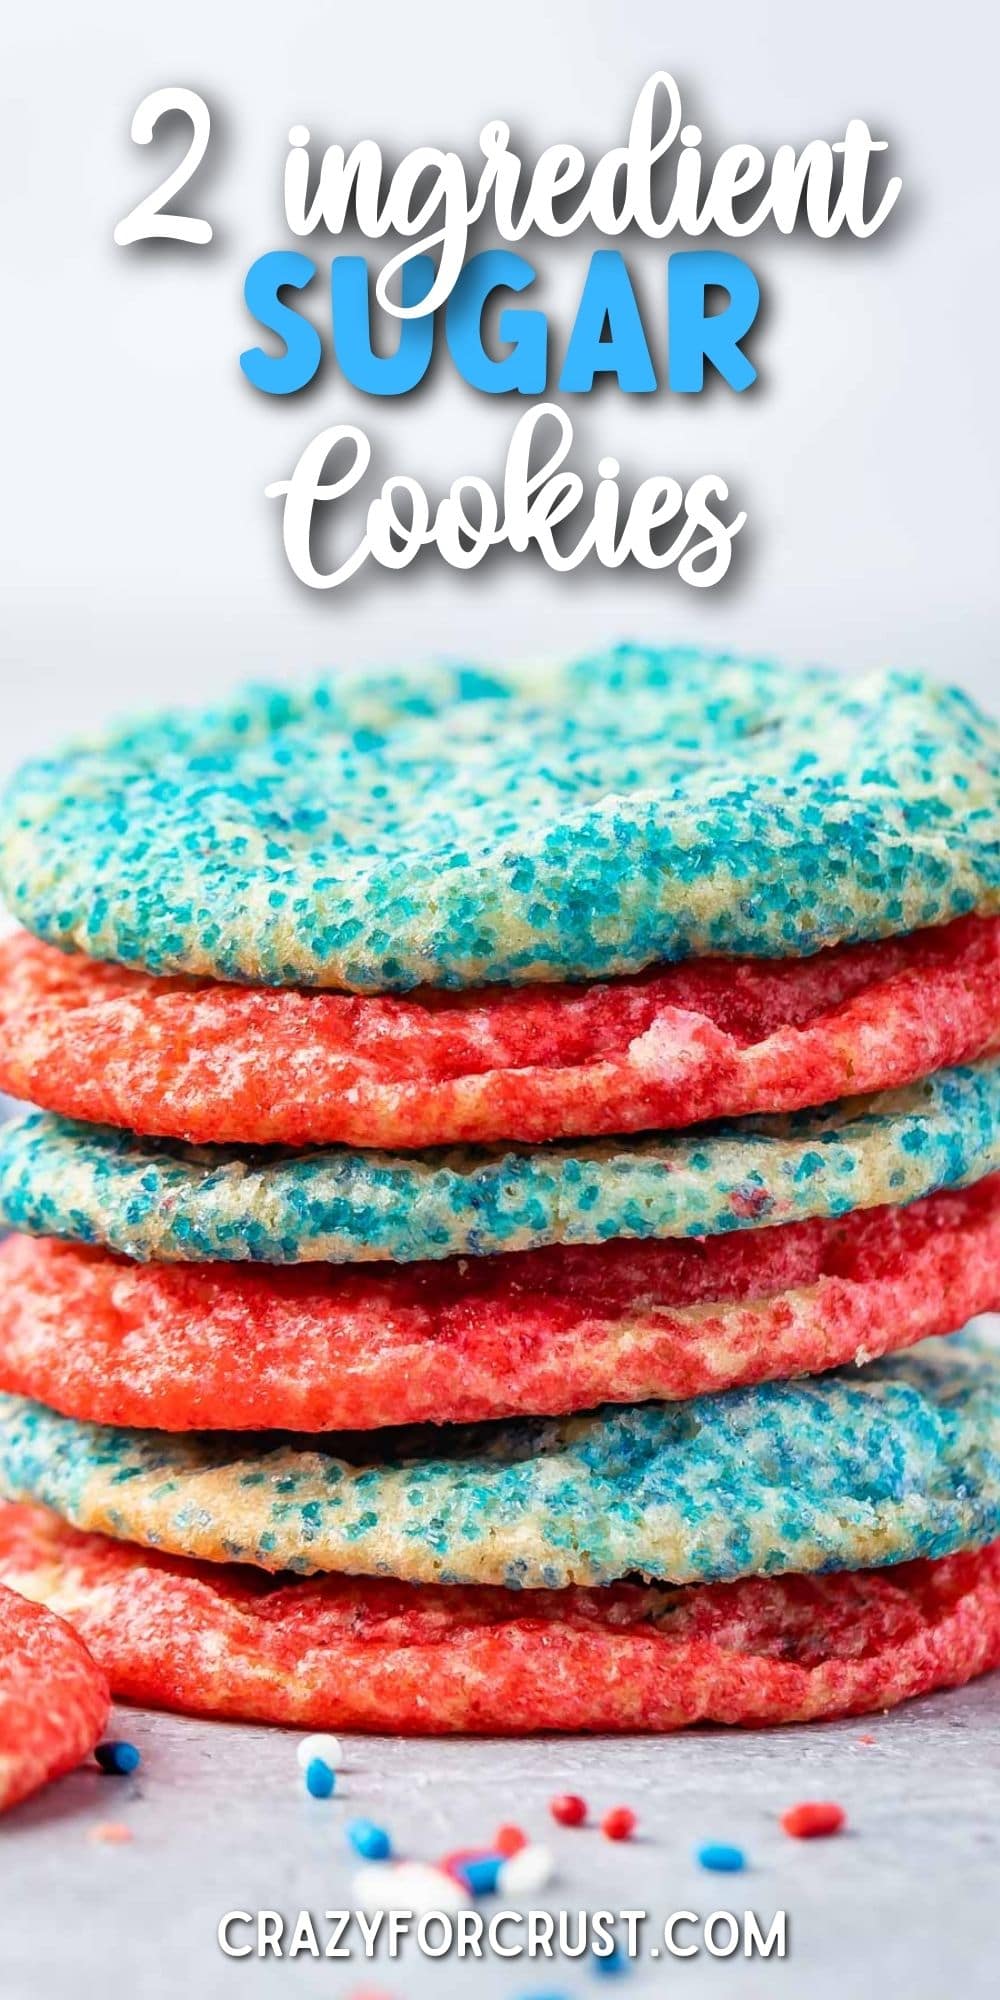 Stack of 6 sugar cookies alternating blue and red with recipe title on top of image